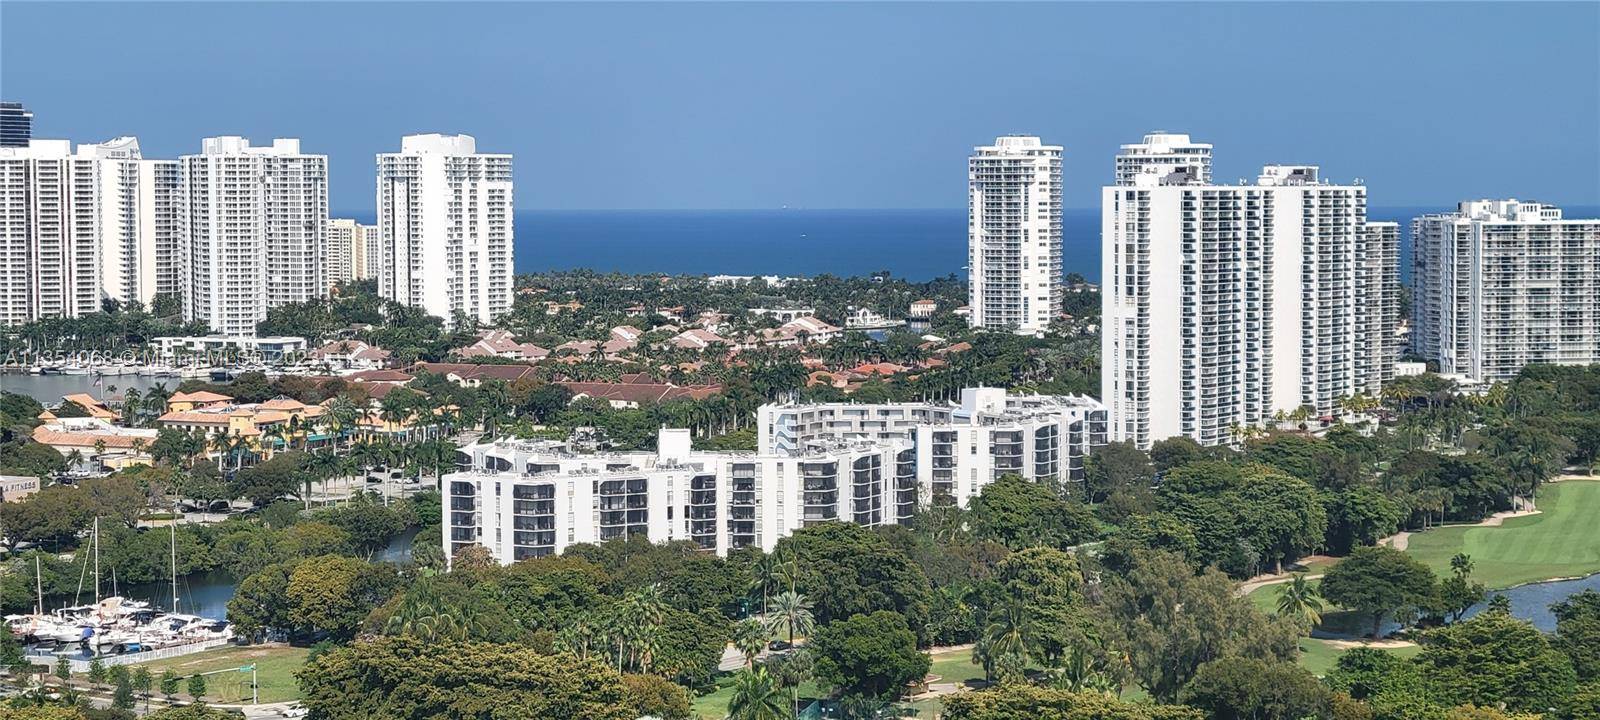 Live the chic life ! A fabulous Aventura penthouse w amazing water, city golf course views.